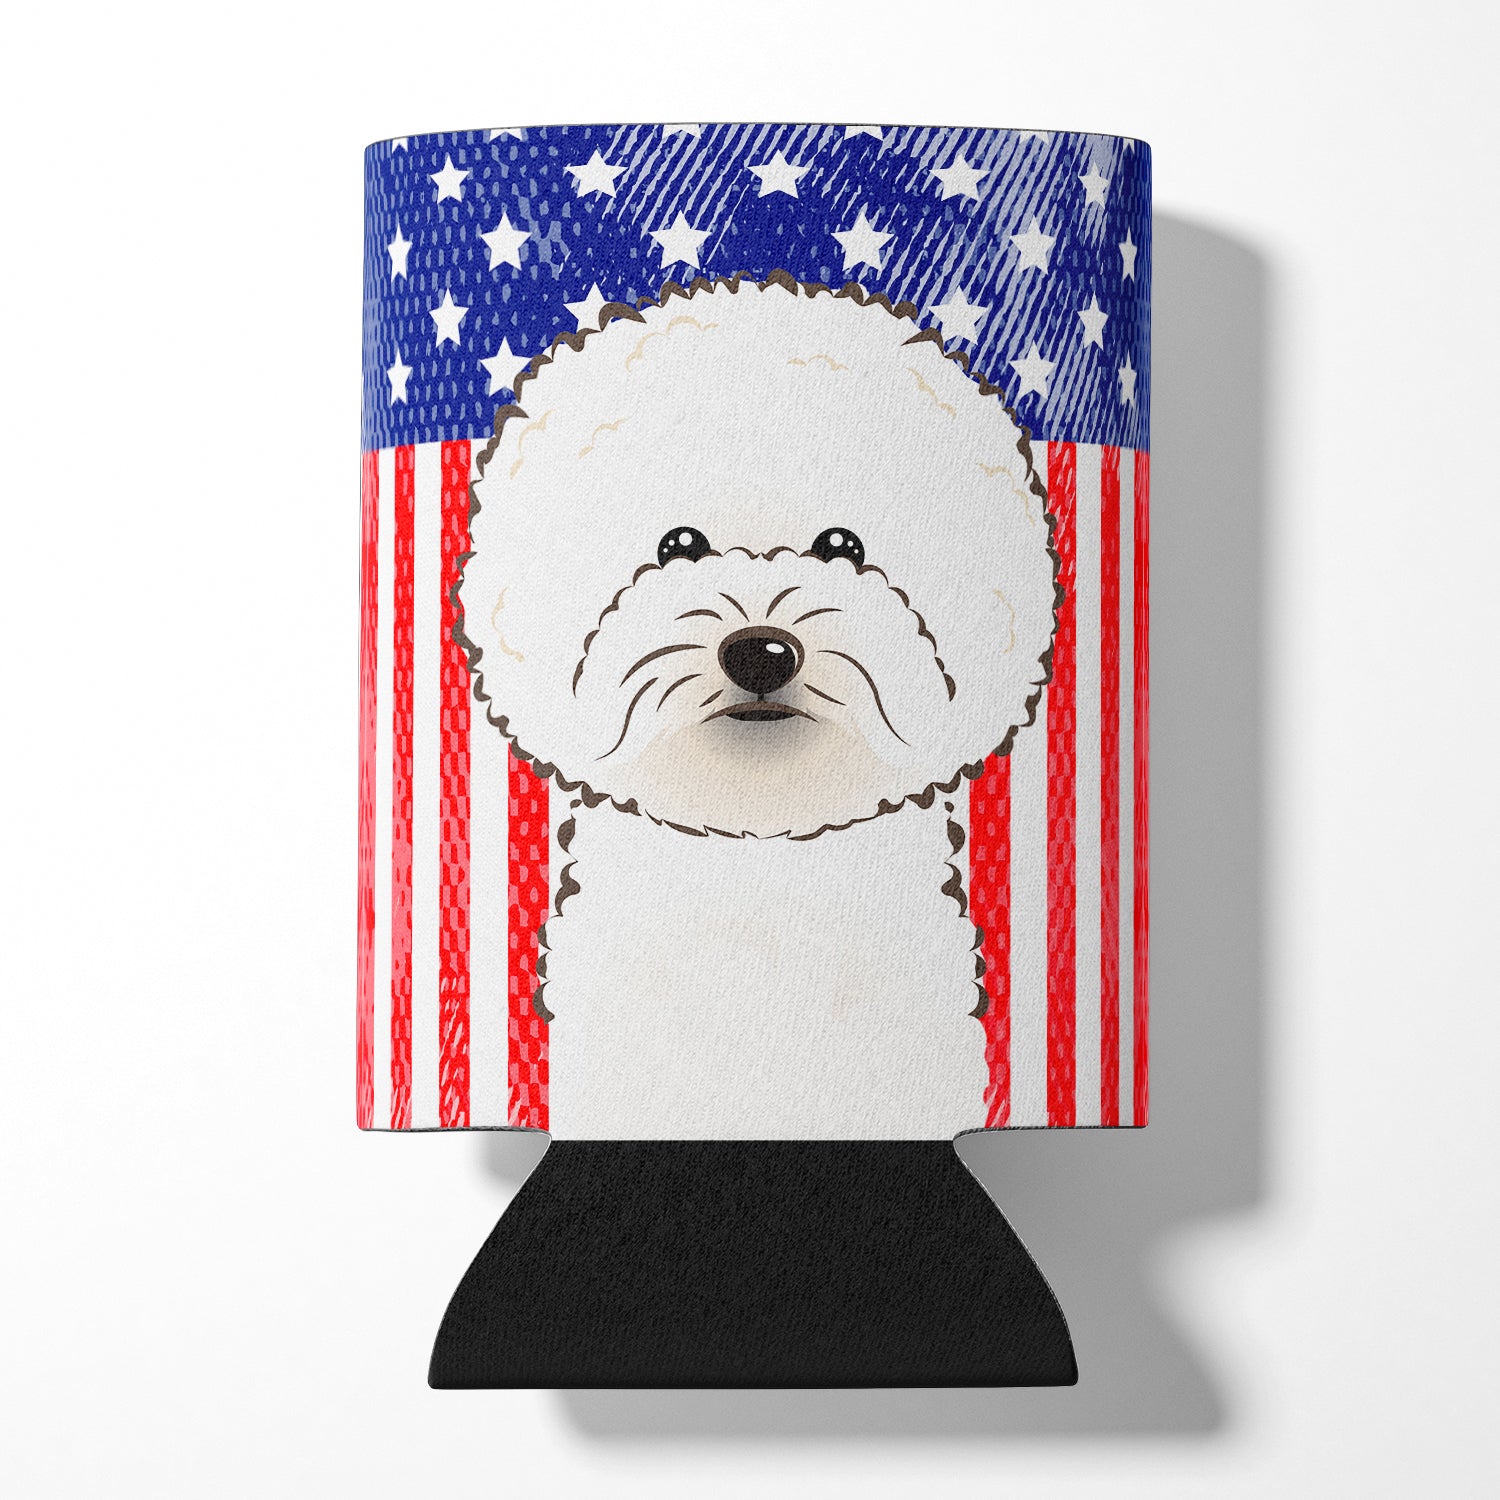 American Flag and Bichon Frise Can or Bottle Hugger BB2147CC.